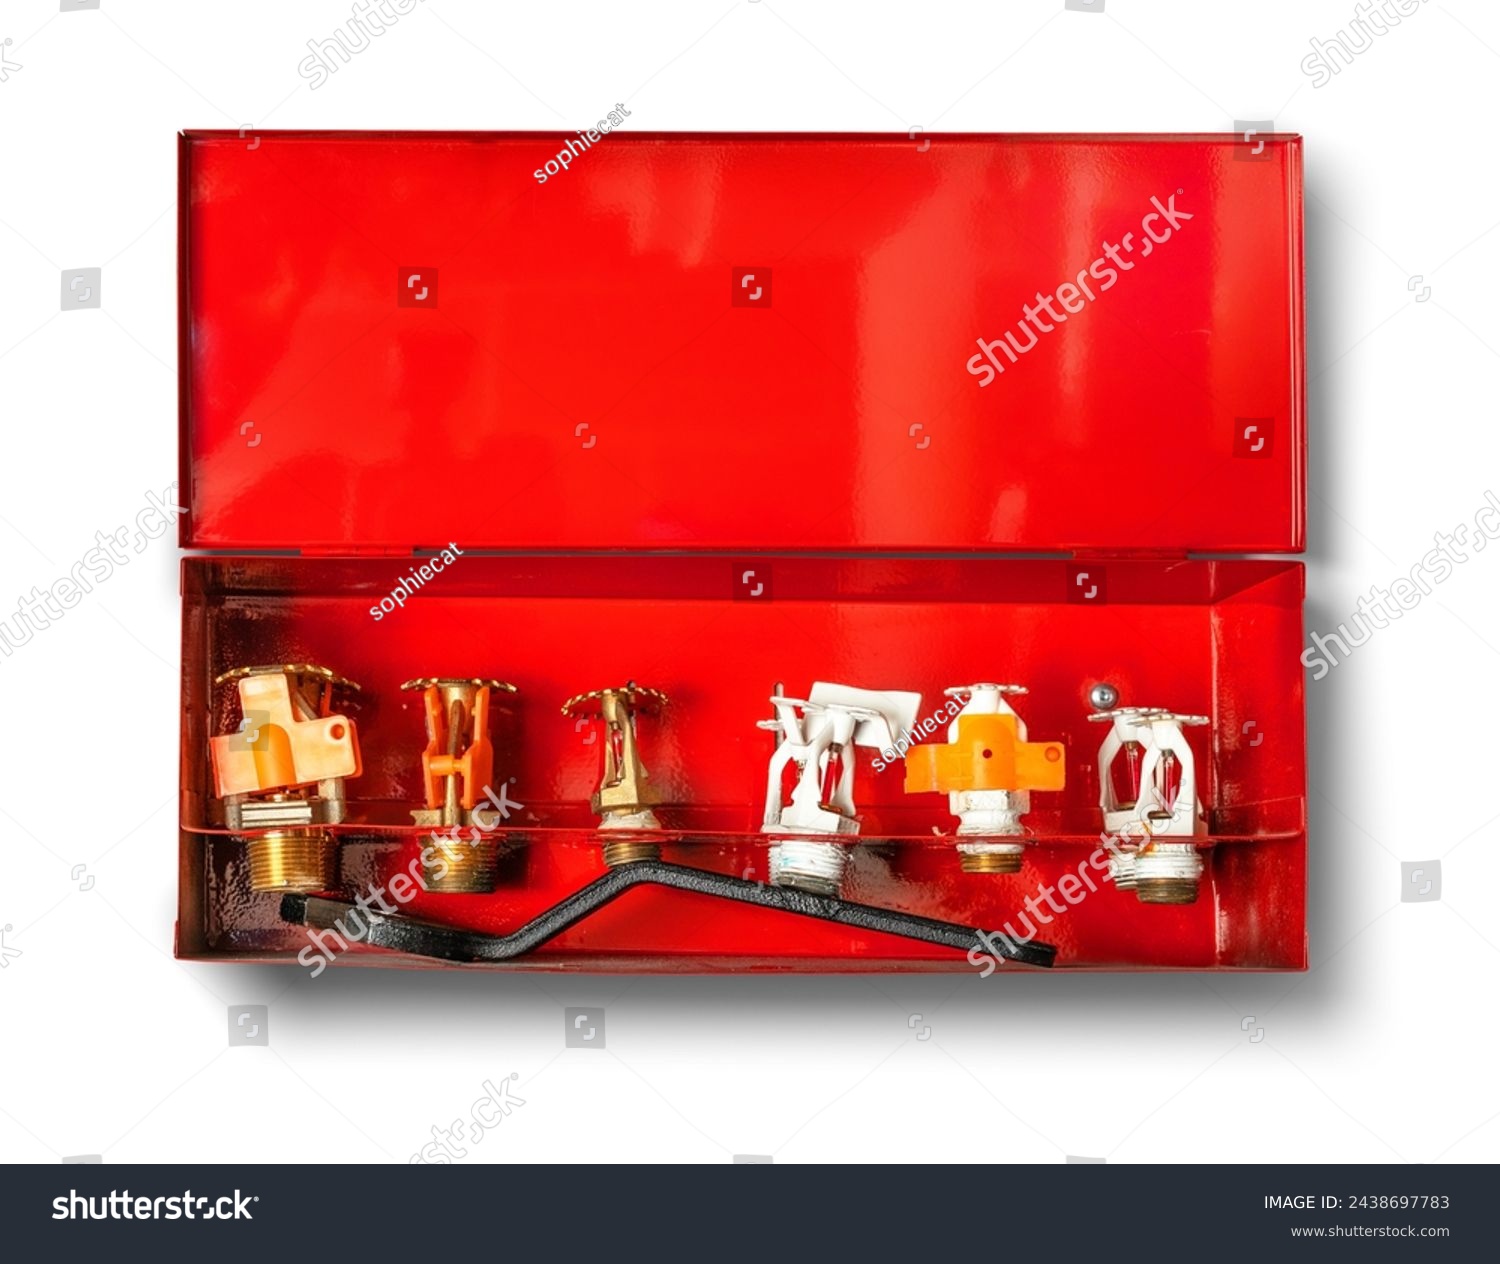 Wet fire sprinkler head replacement cabinet. 6 sprinkler heads with wrench in box. Assortiment of fire sprinkler heads for underground parking sprinkler system. Selective focus. White background.  #2438697783